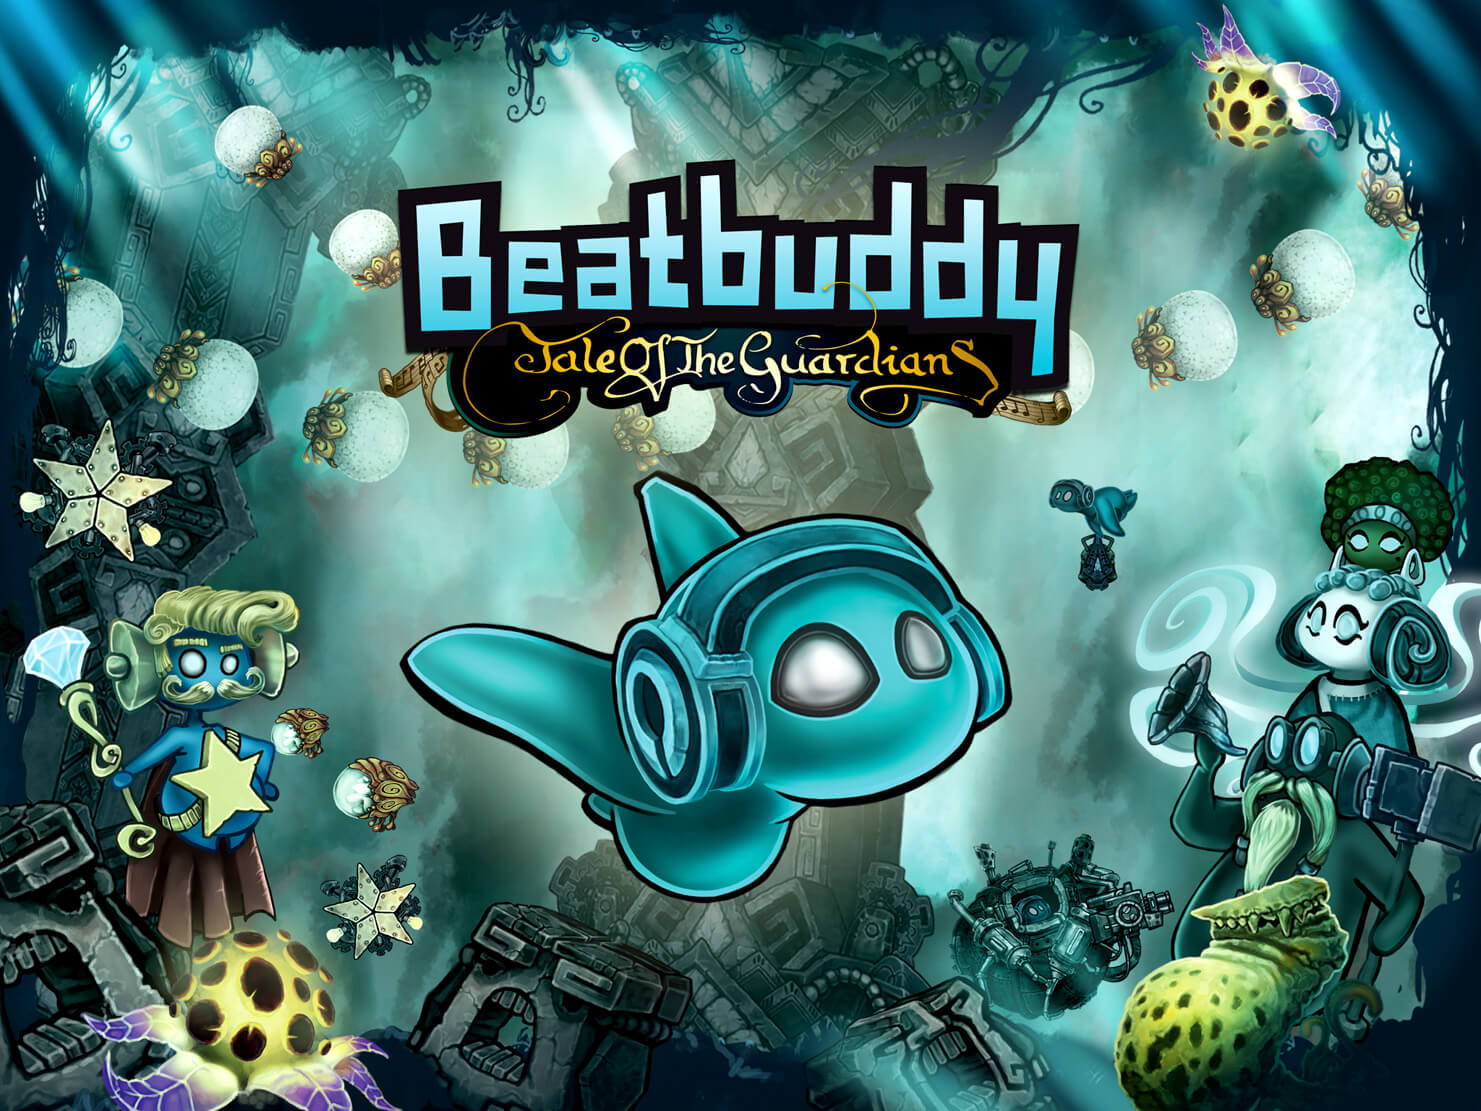 Beatbuddy: On Tour Collector's Edition Download Game Hacked